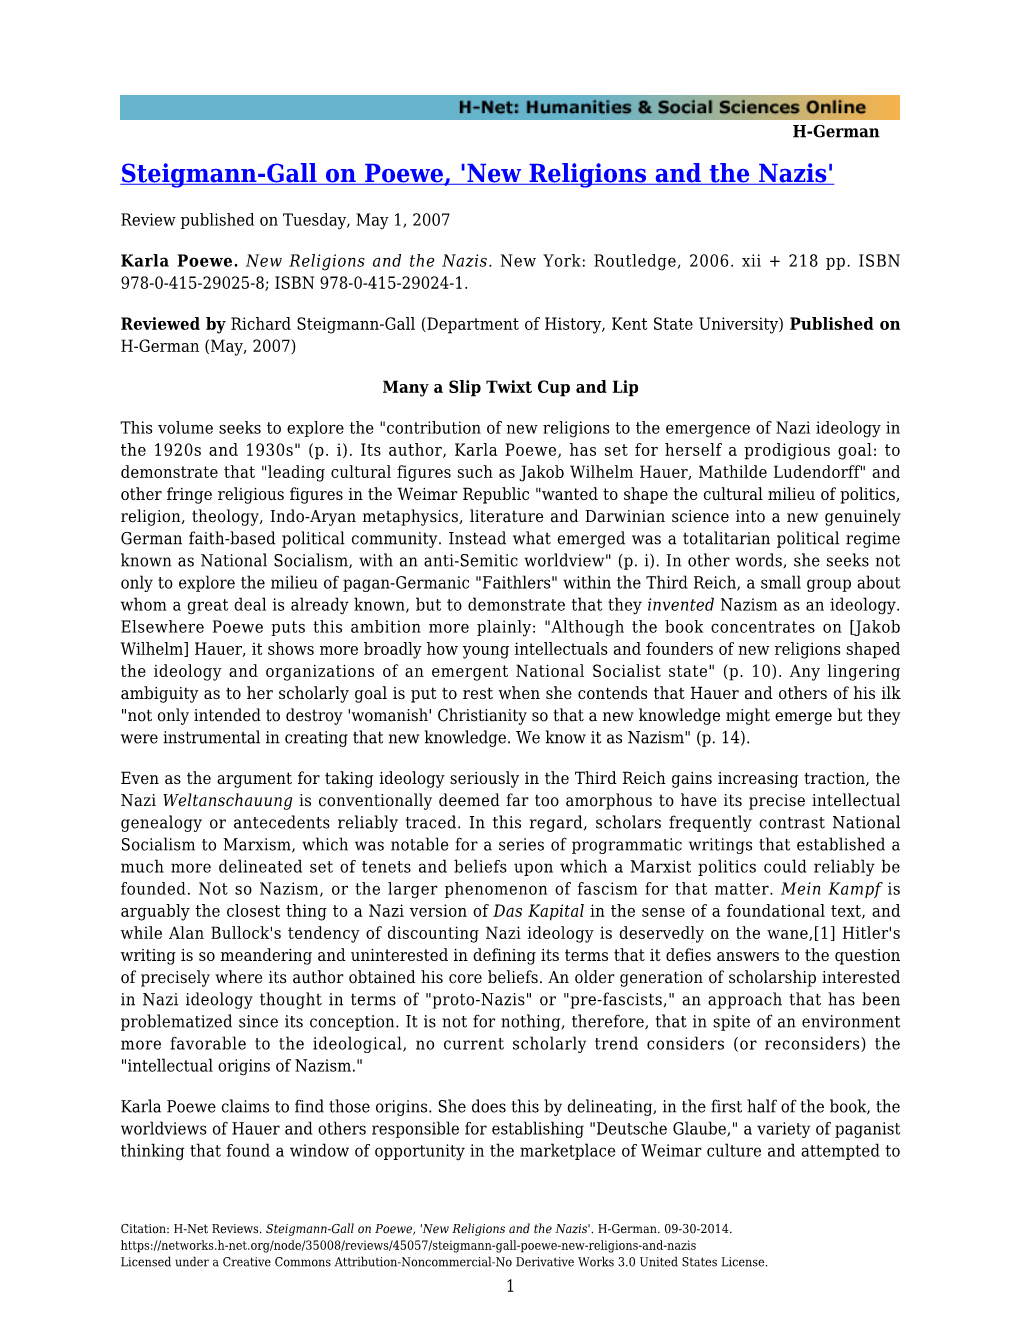 Steigmann-Gall on Poewe, 'New Religions and the Nazis'